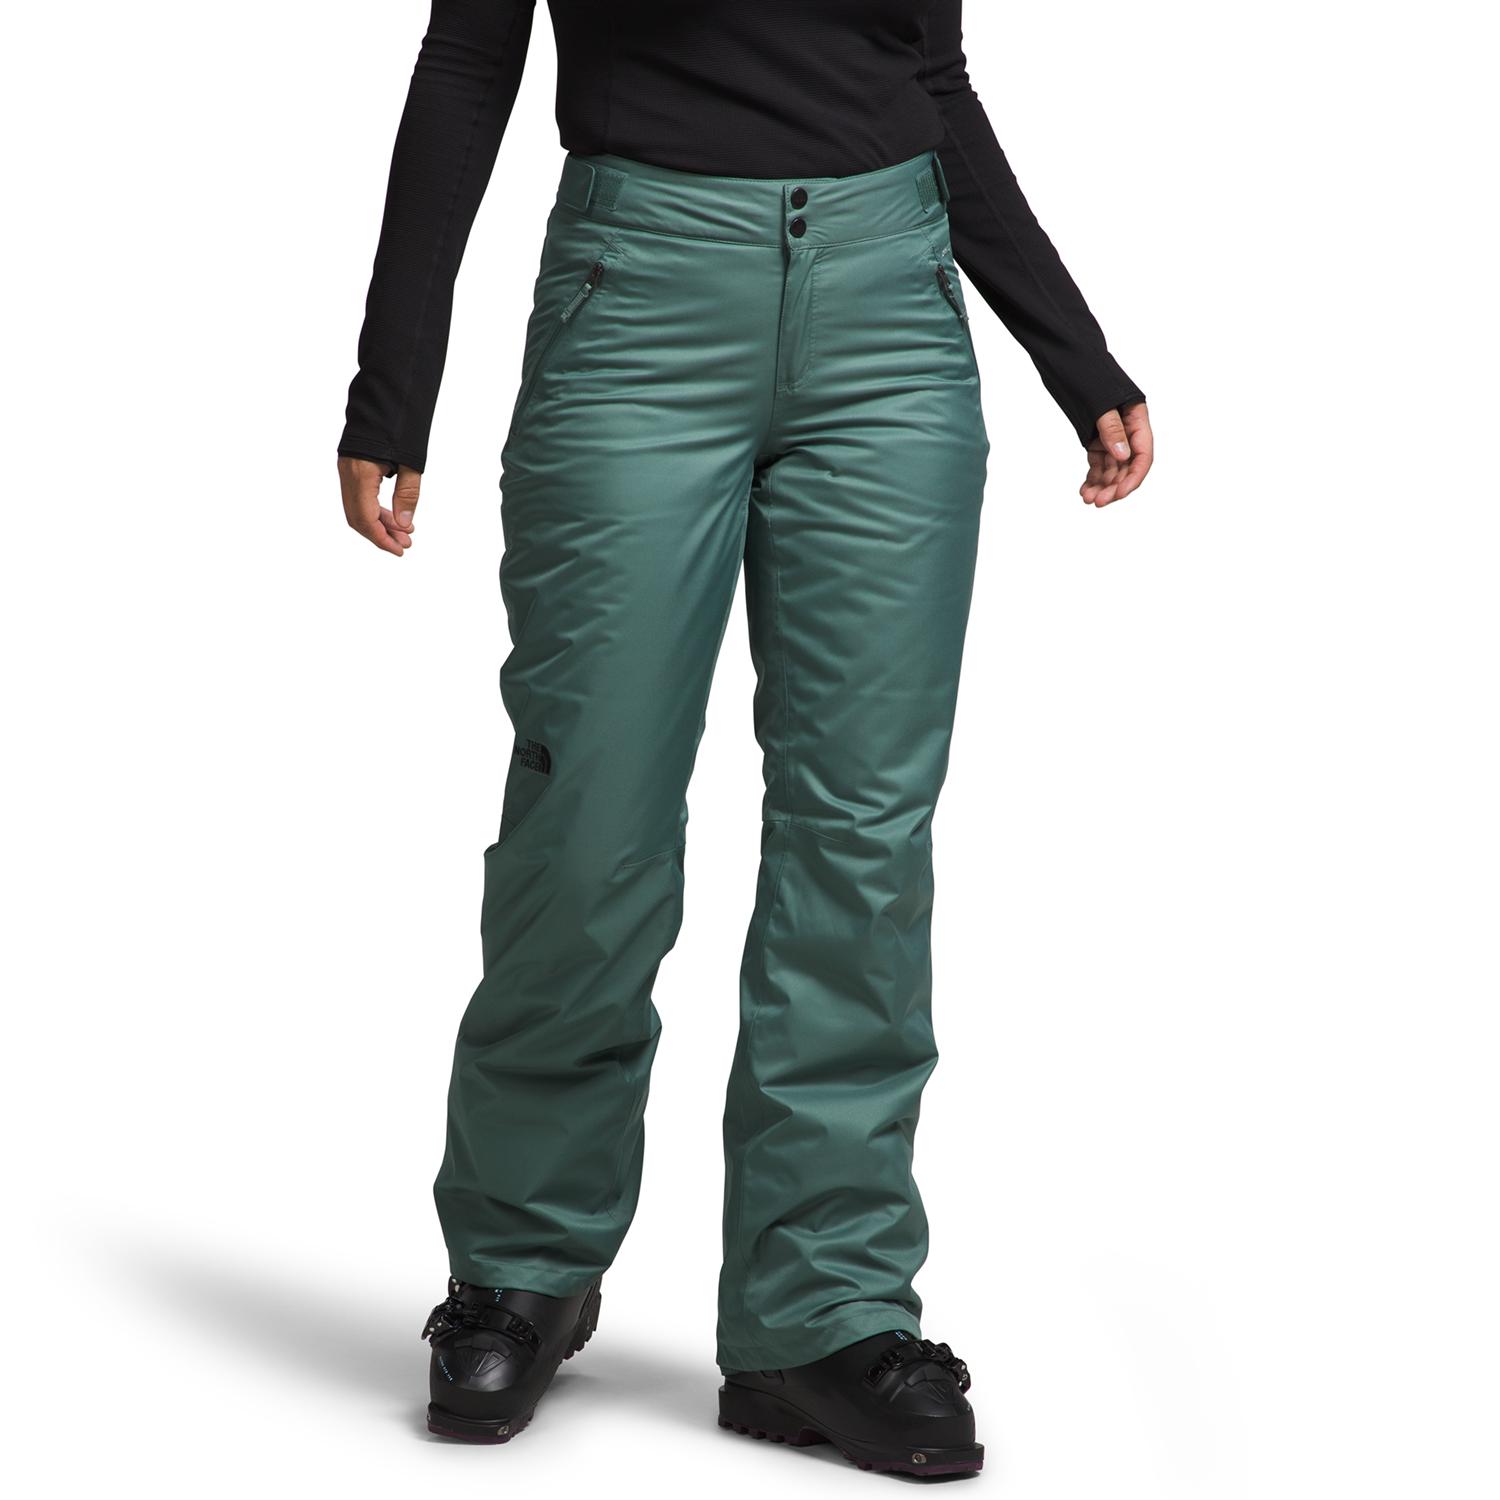 https://images.evo.com/imgp/zoom/238414/1058620/the-north-face-sally-insulated-tall-pants-women-s-.jpg